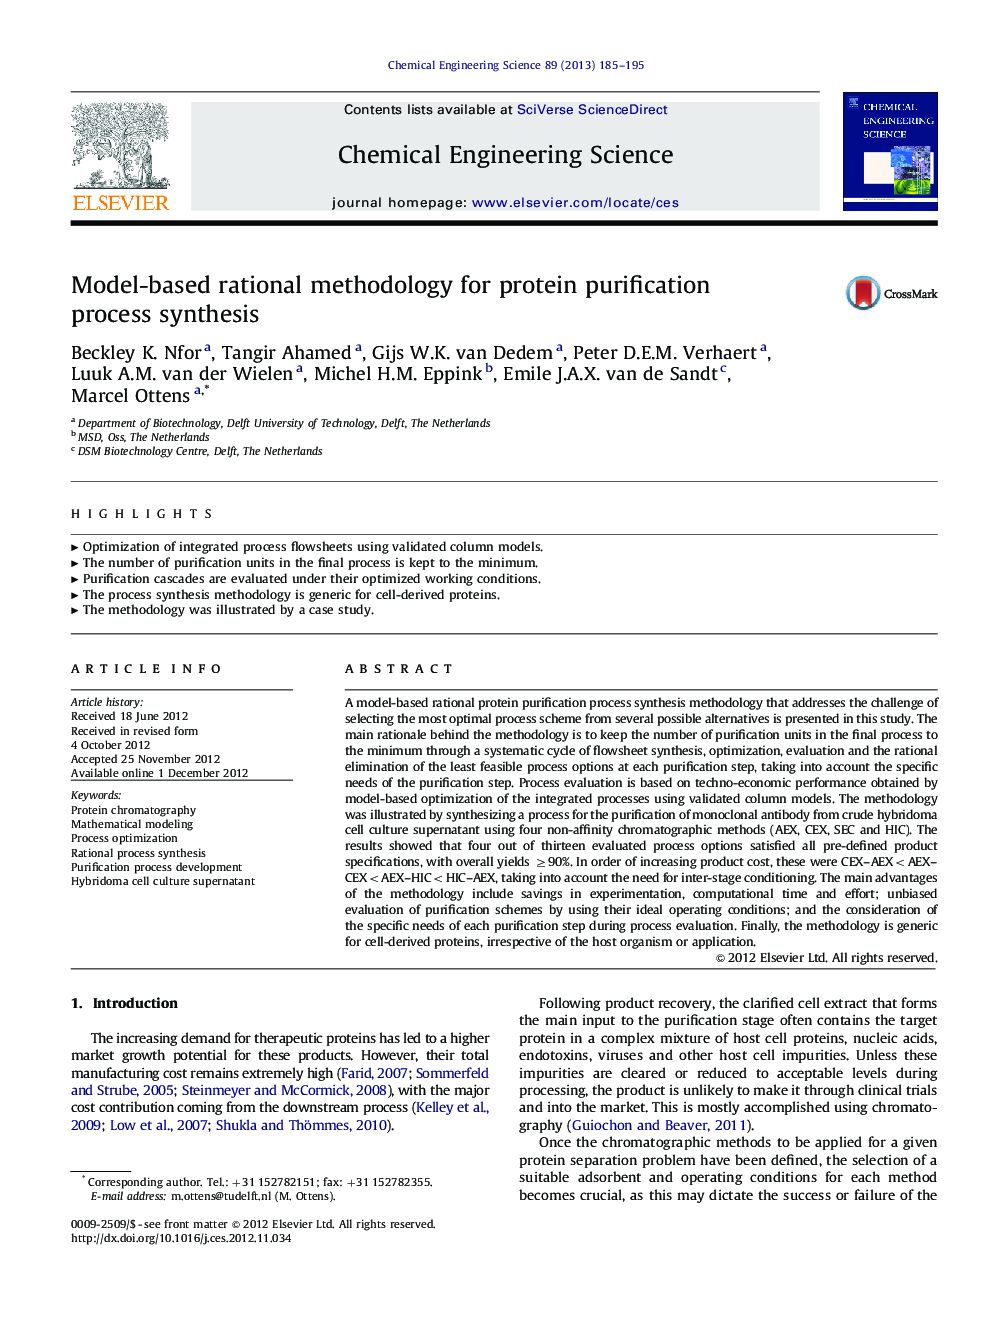 Model-based rational methodology for protein purification process synthesis